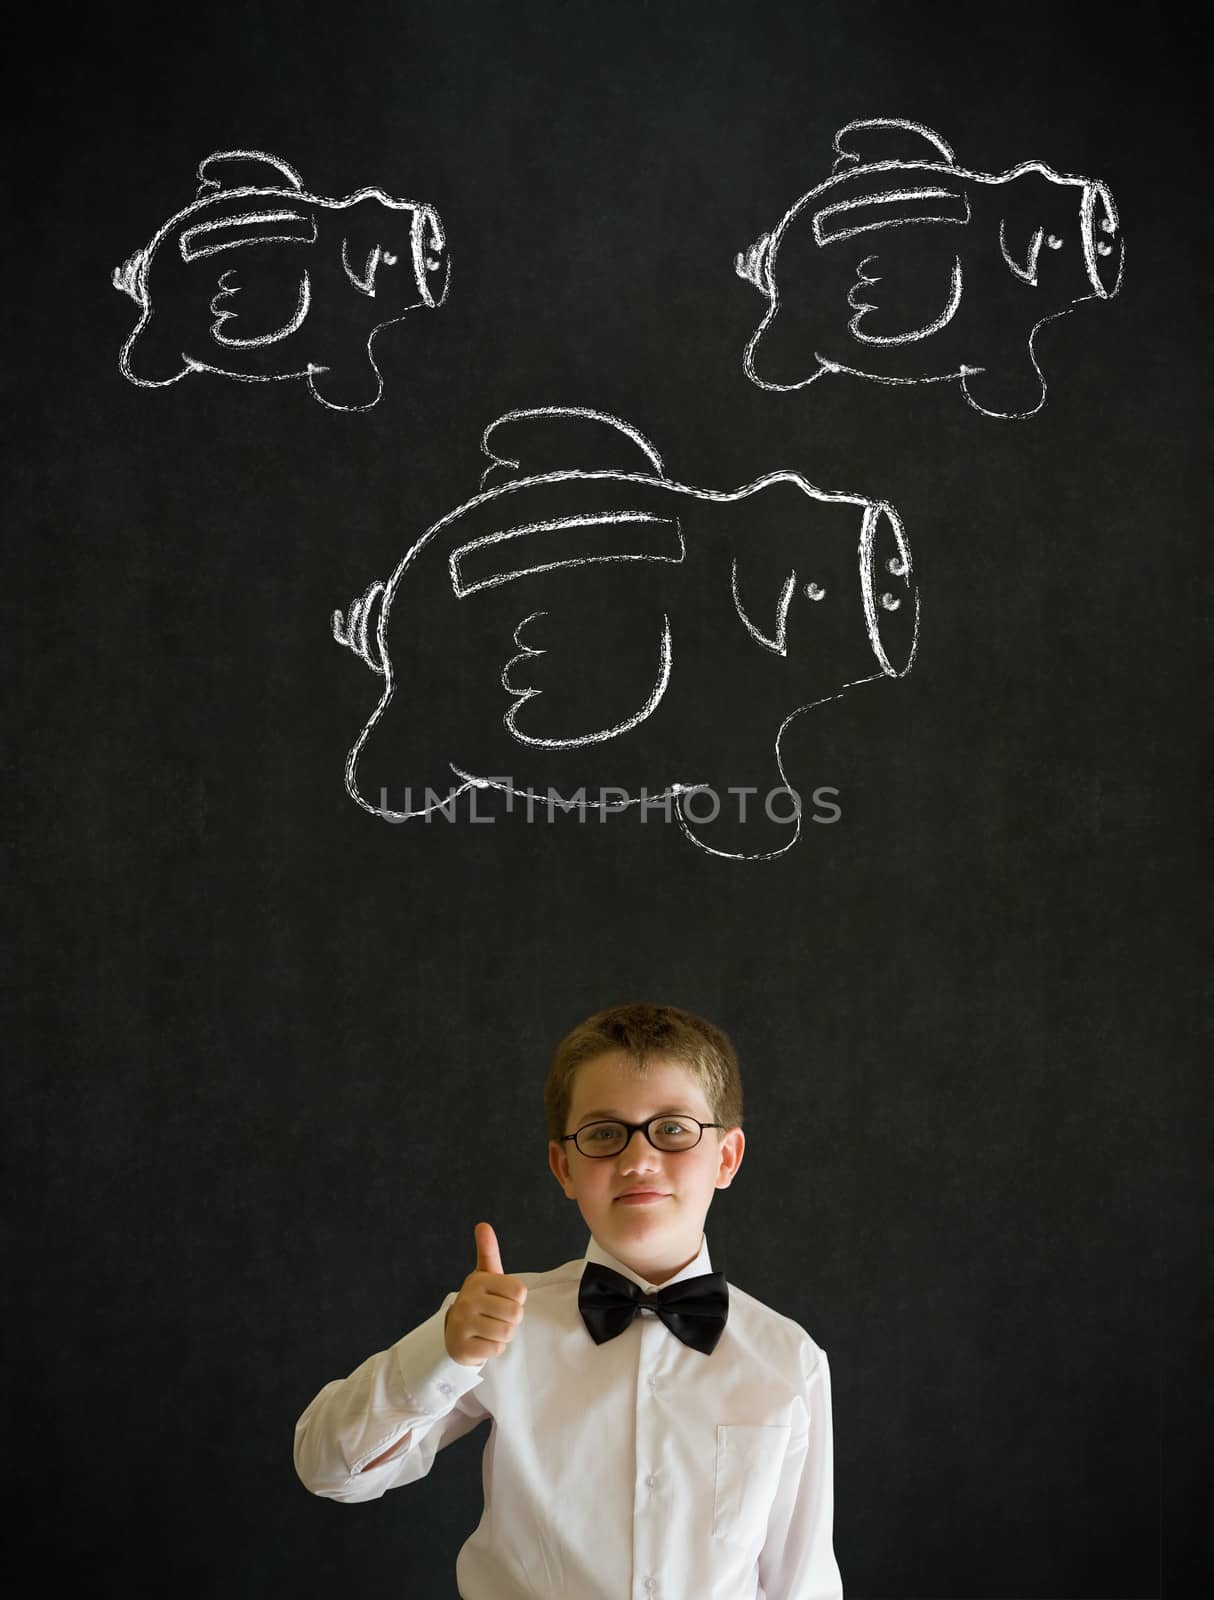 Thumbs up young business boy with flying money piggy banks in chalk on blackboard background by alistaircotton